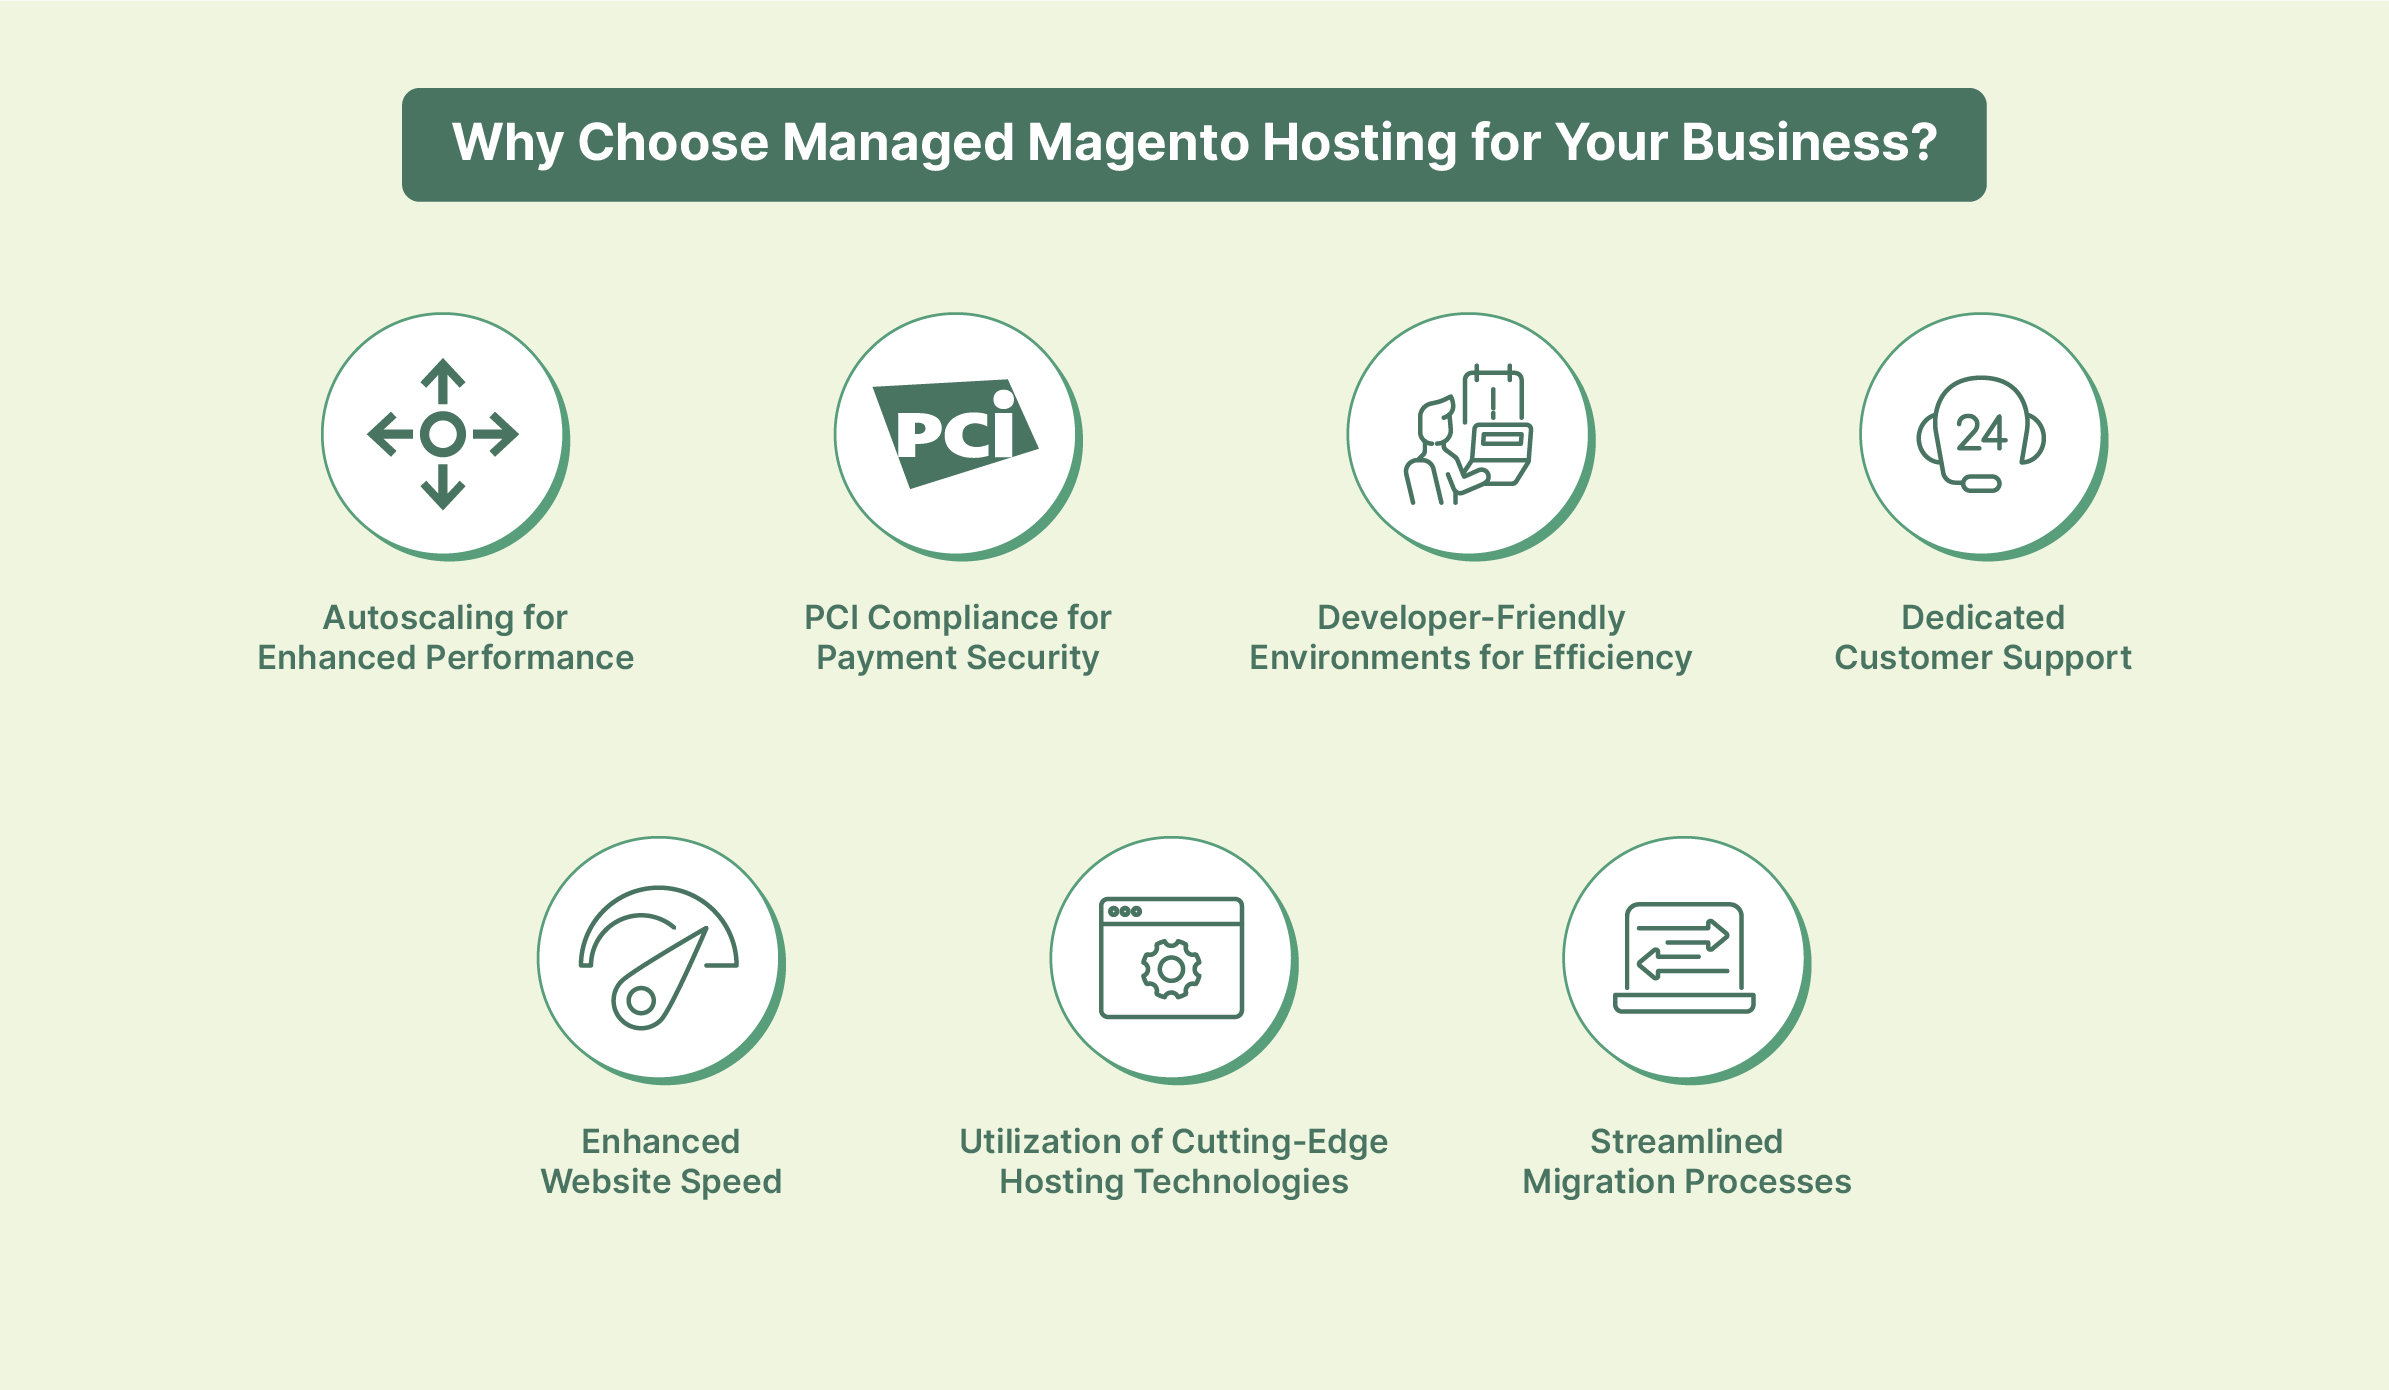 Why Choose Managed Magento Hosting for Your Business